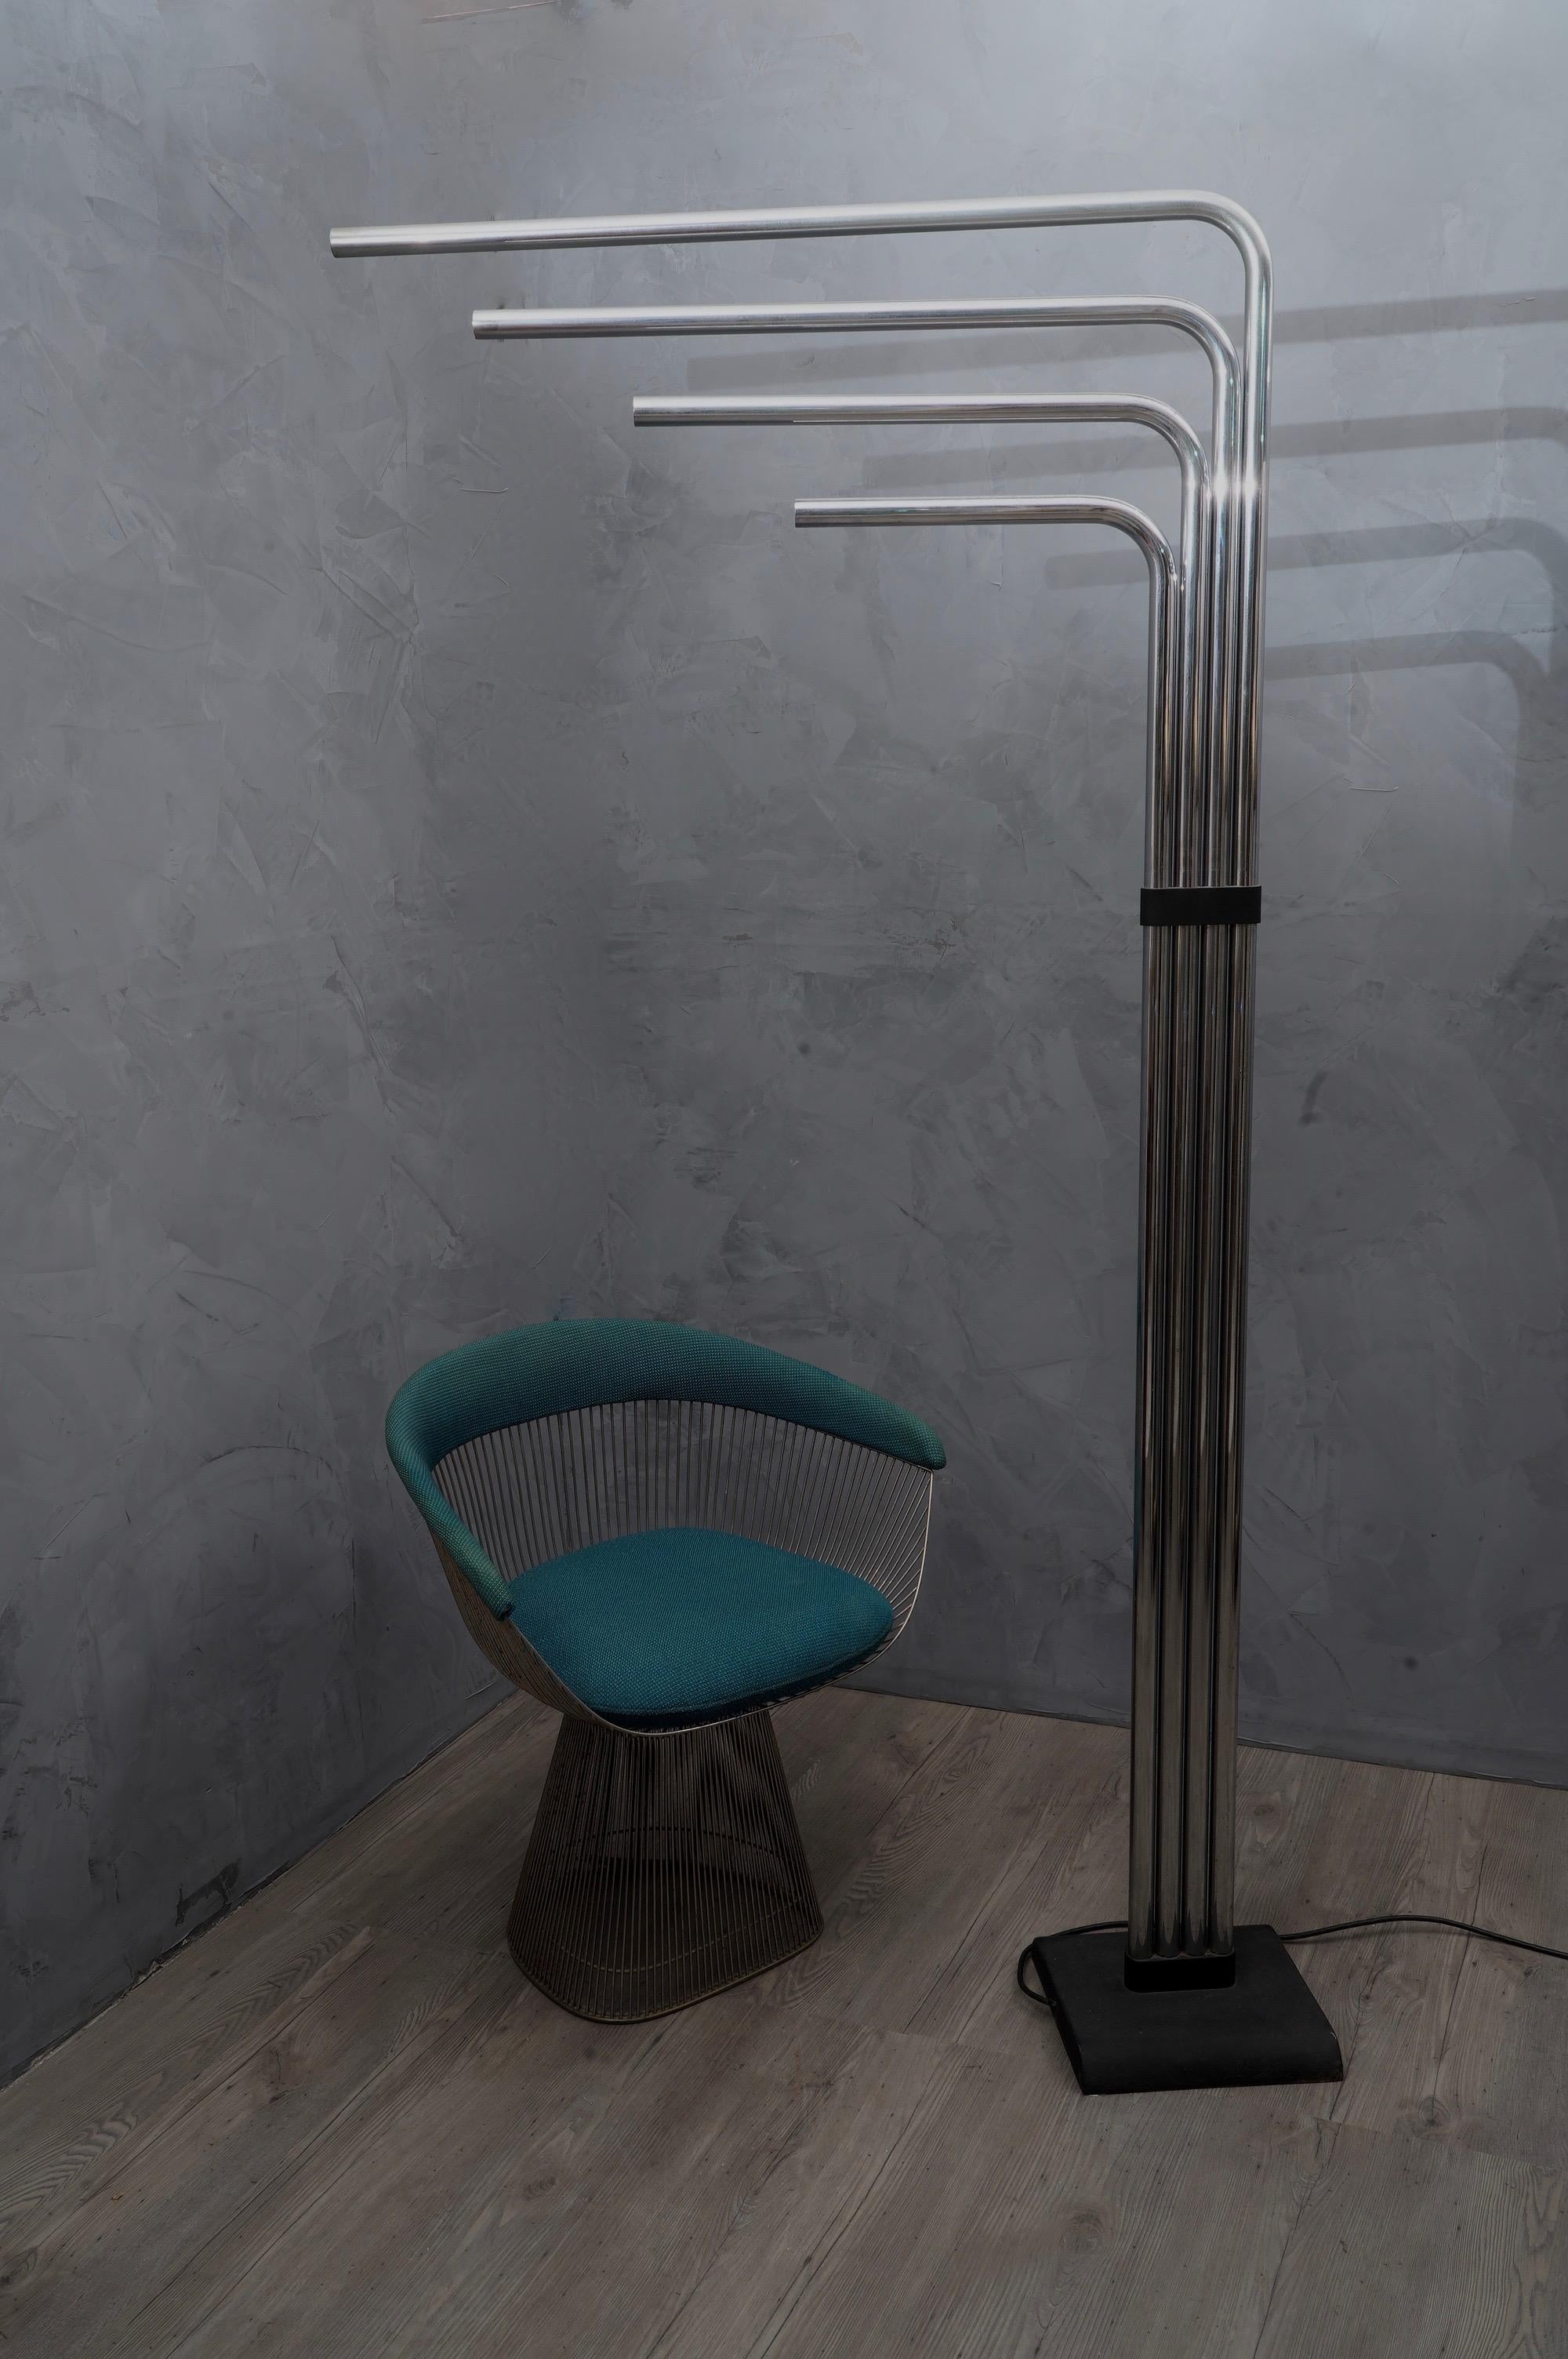 Architectural and sculptural floor lamp with articulated arms in metal chrome. Icon of the Italian design, Goffredo Reggiani was a signature of the Italian Renaissance design from 1950s. It's an important maker like Sciolari, Artemide, Stilnovo